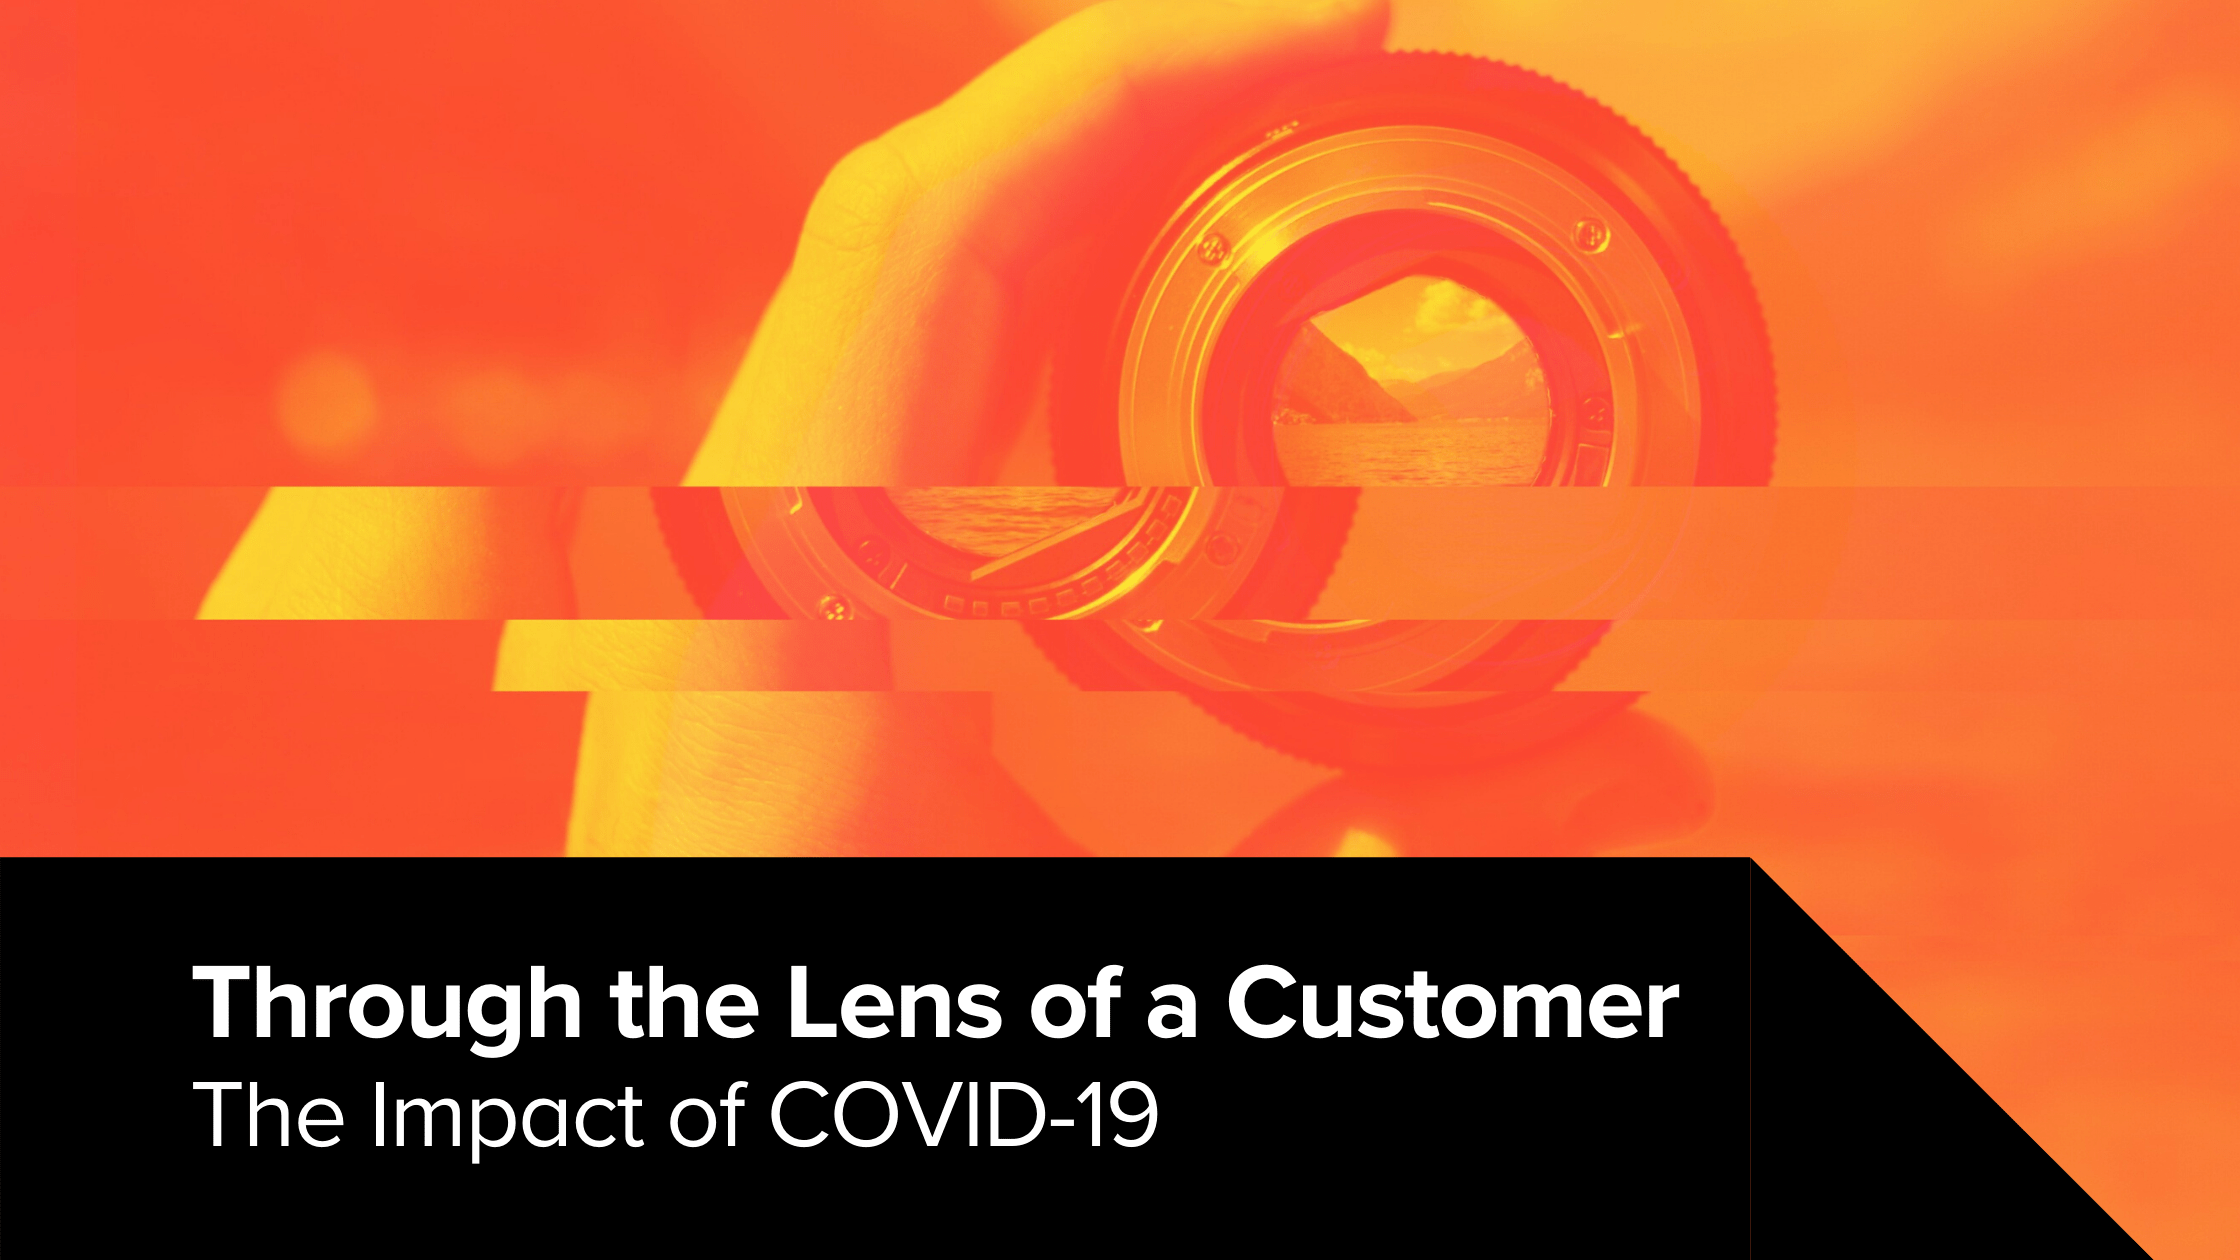 Through the Lens of a Customer: The Impacts of COVID-19